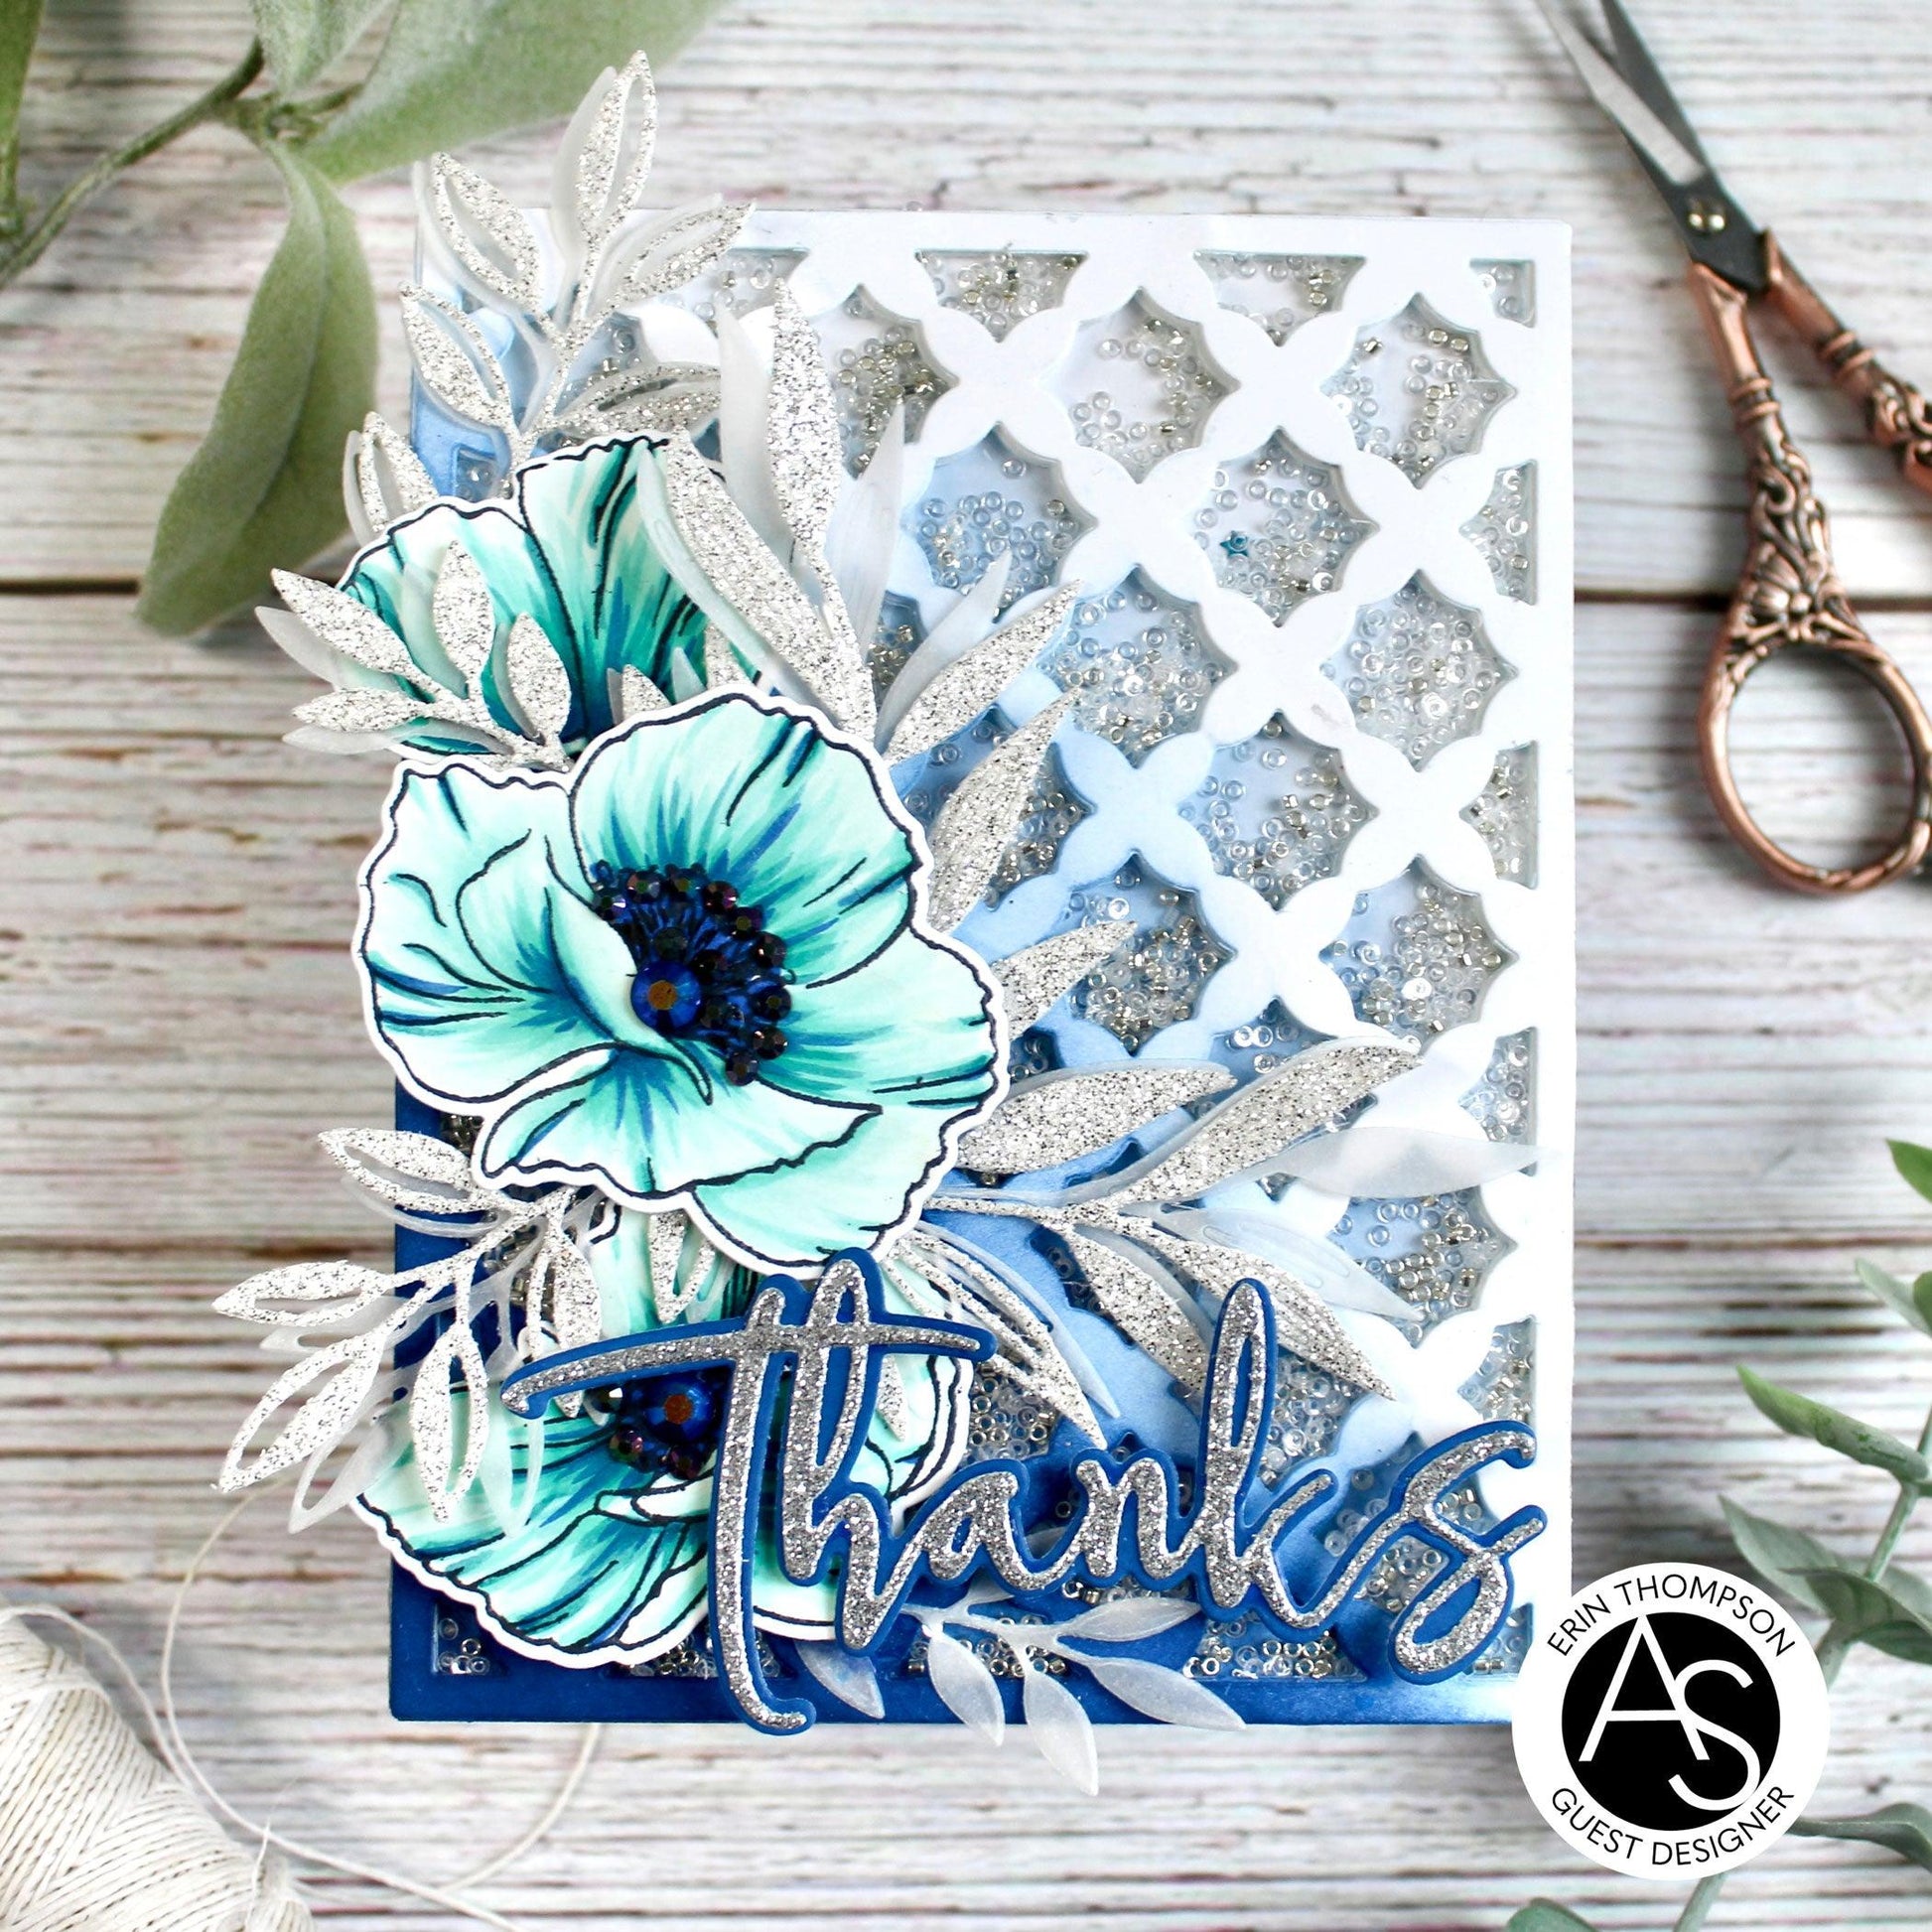 Cindy-Poppies-Stamp-alex-syberia-designs-flowers-cardmaking-coloring-dies-stencils-shakercard-how-to-thankyou-cards